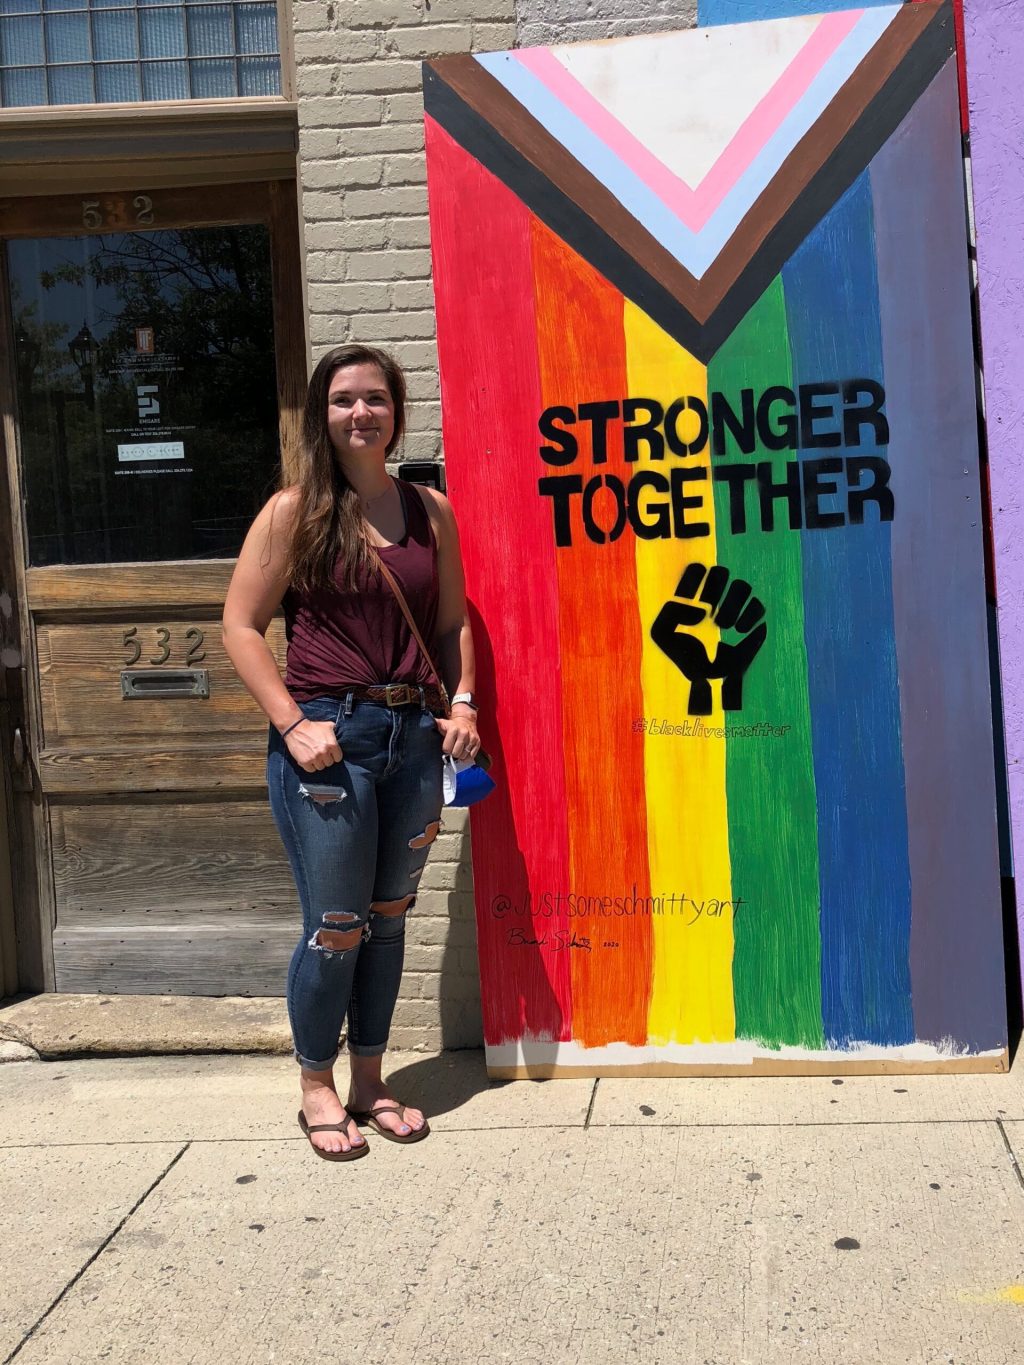 A person standing in front of a mural reading "Stronger Together" with a Black power fist against an inclusive Pride flag backdrop